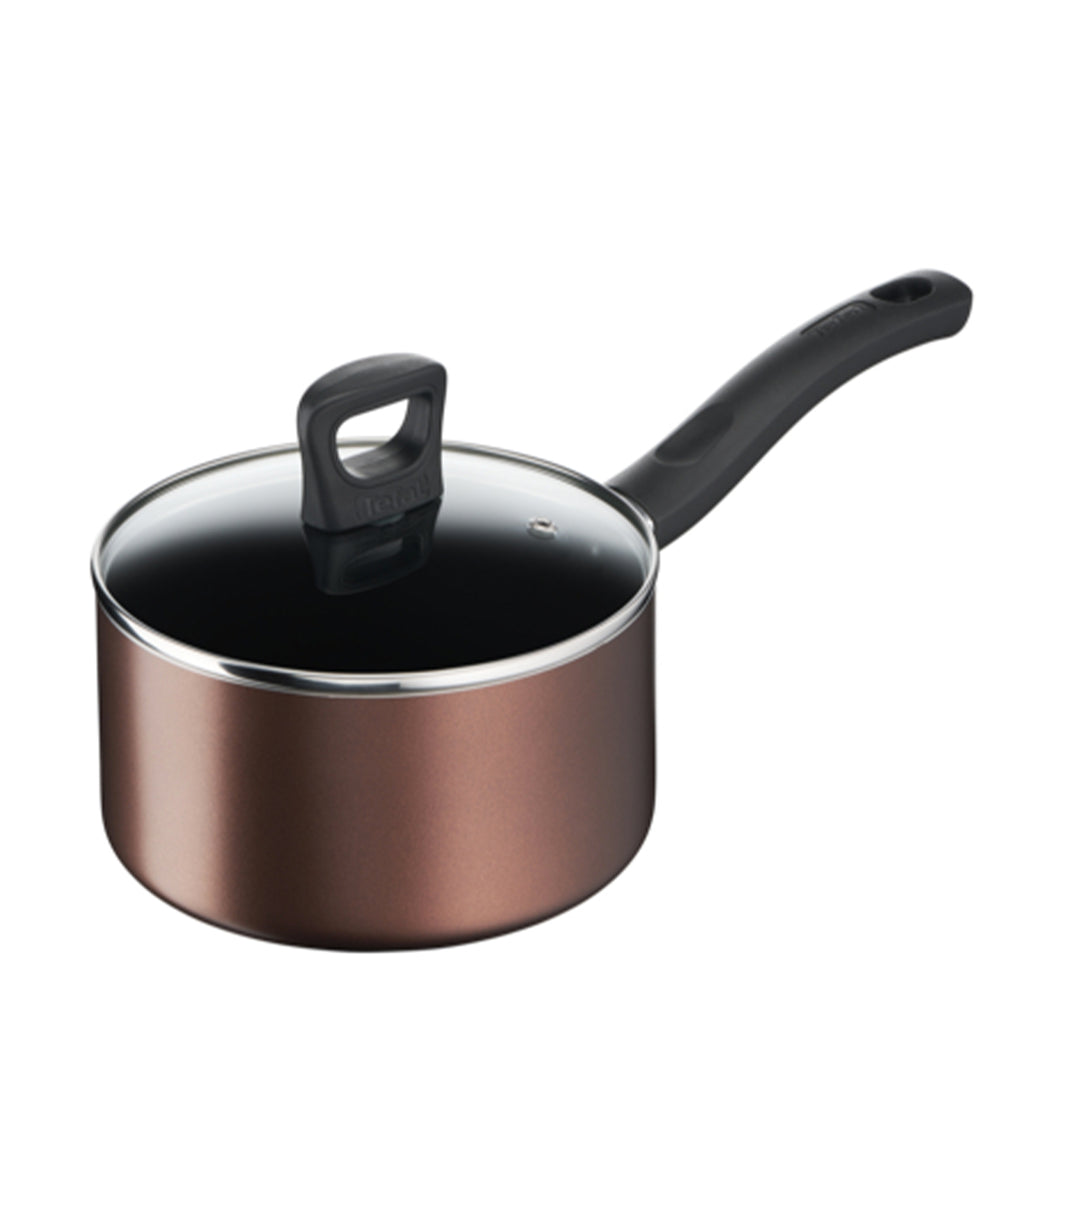 Tefal Day by Day Saucepan with Lid - 18cm